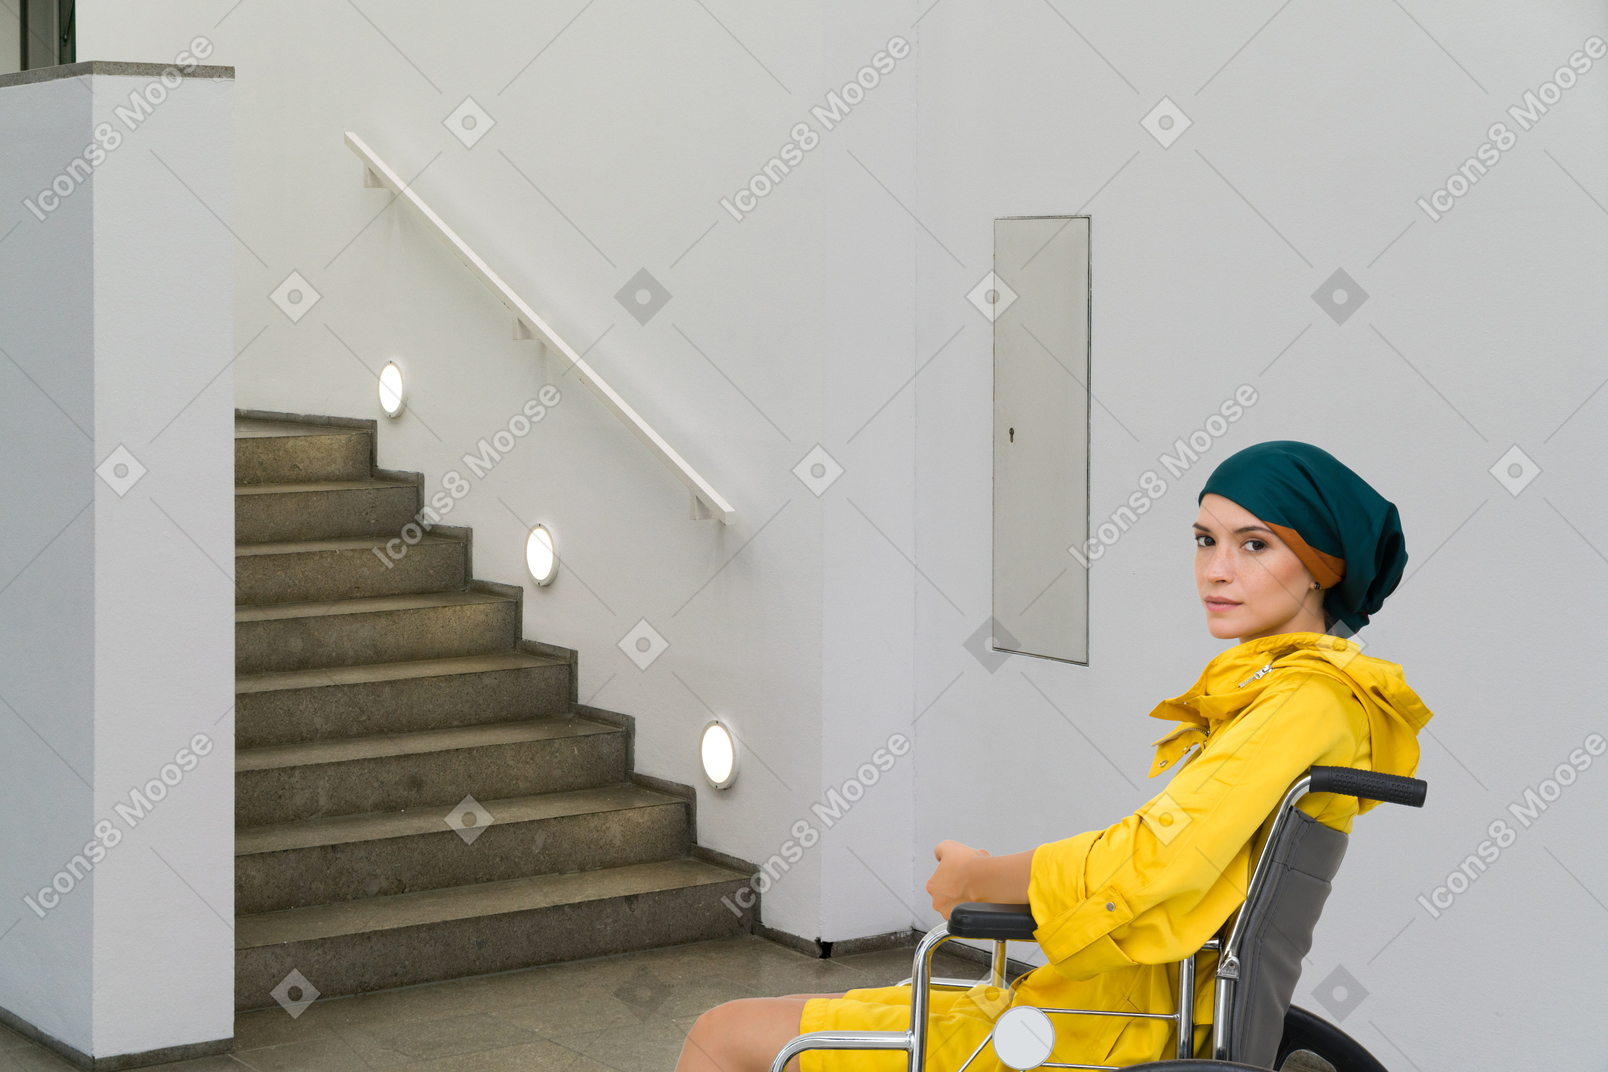 Woman in wheelchair in front of stairs